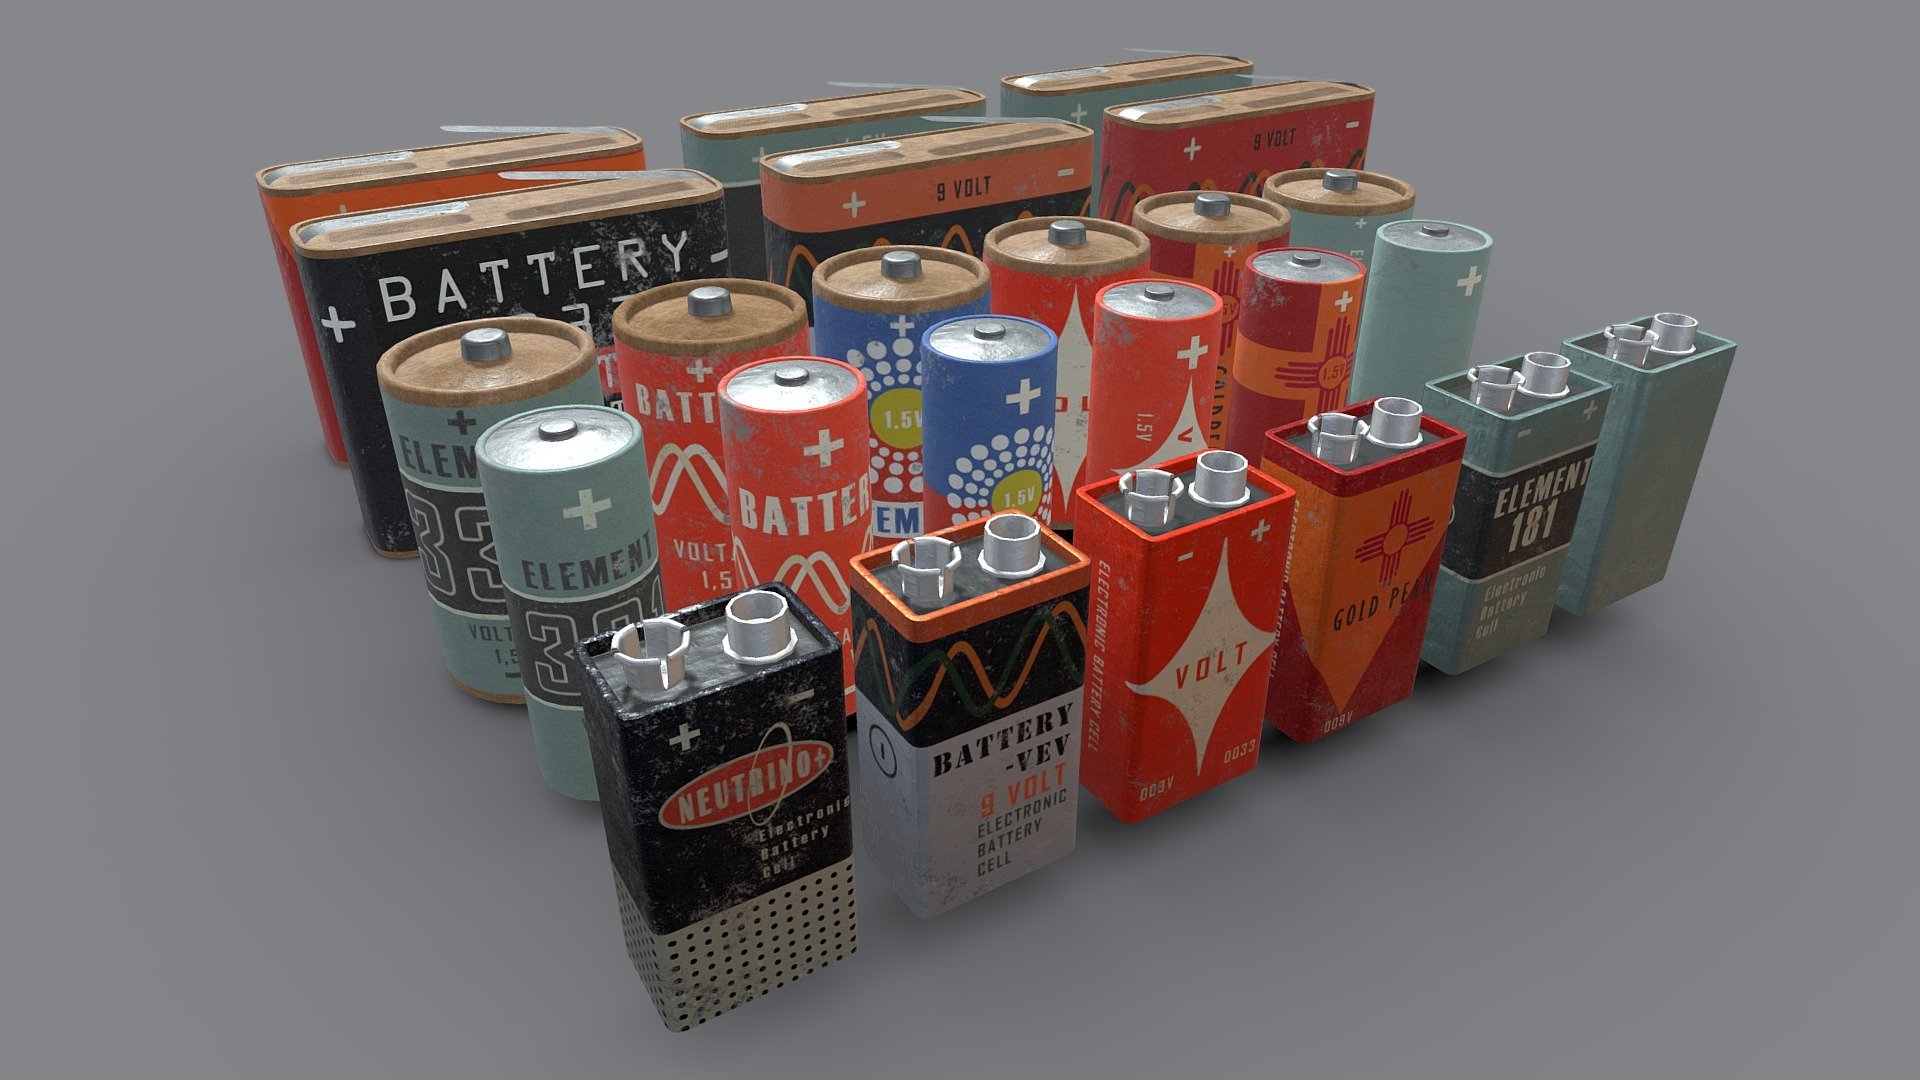 Battery vintag pack three sets of textures - new /used/ rust. 

PBR Metallic Roughness - Diffuse, Roughness, Metallic, Height and Normal maps 1024x1024 resolution in PNG.  

Pack included 4 battery size: Crona - 2x5x2.5cm/ CylAA - 1.8x6cm / CylAAA - 1.2x5.8cm / LBox - 2,6x6,8x8,8cm.

Every size 6 label design - Neutrino, VEV, Volt, GoldPeak, Element, Planeta, Clear. 

Every size and label set have three varition NEW / USED/ RUST.  

If you need  retexturing with  wish you can make request in pm!

Detailed Description Info: 3D Model Geometry: Quads/Tris Polygon Count: 19554 Vertice Count: 21222 Textures: Yes Materials: Yes Rigged: No Animated: No UV Mapped: Yes Unwrapped UV's: Yes Non-Overlapping Textures formats: PBR textures include Diffuse, Roughness, Metallic, Height and Normal maps 3d model